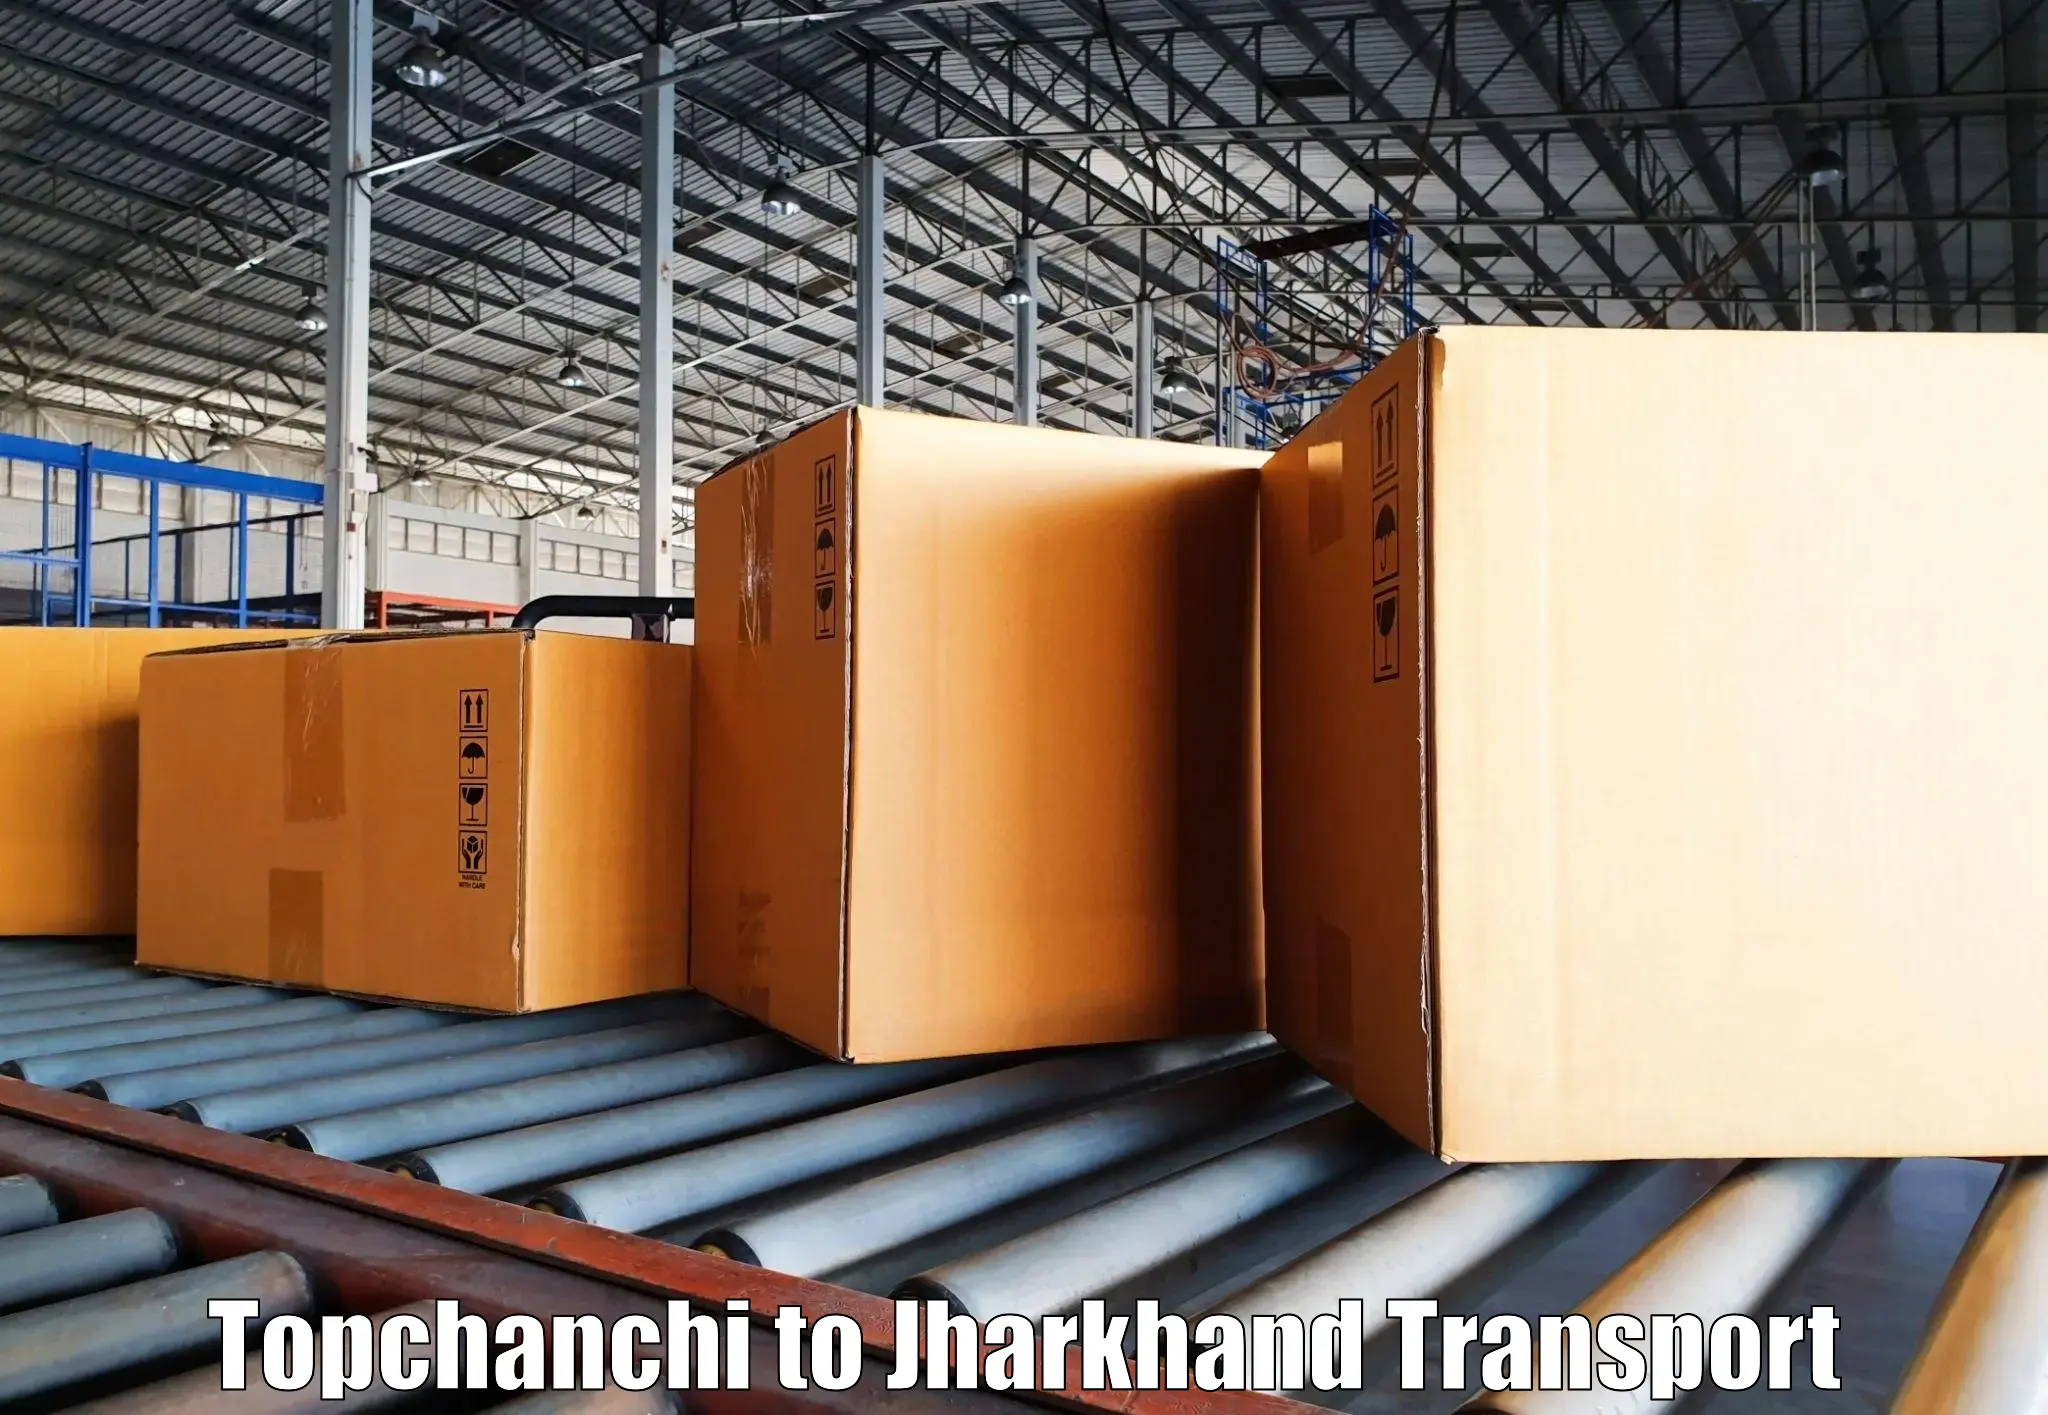 Air freight transport services in Topchanchi to Chandil